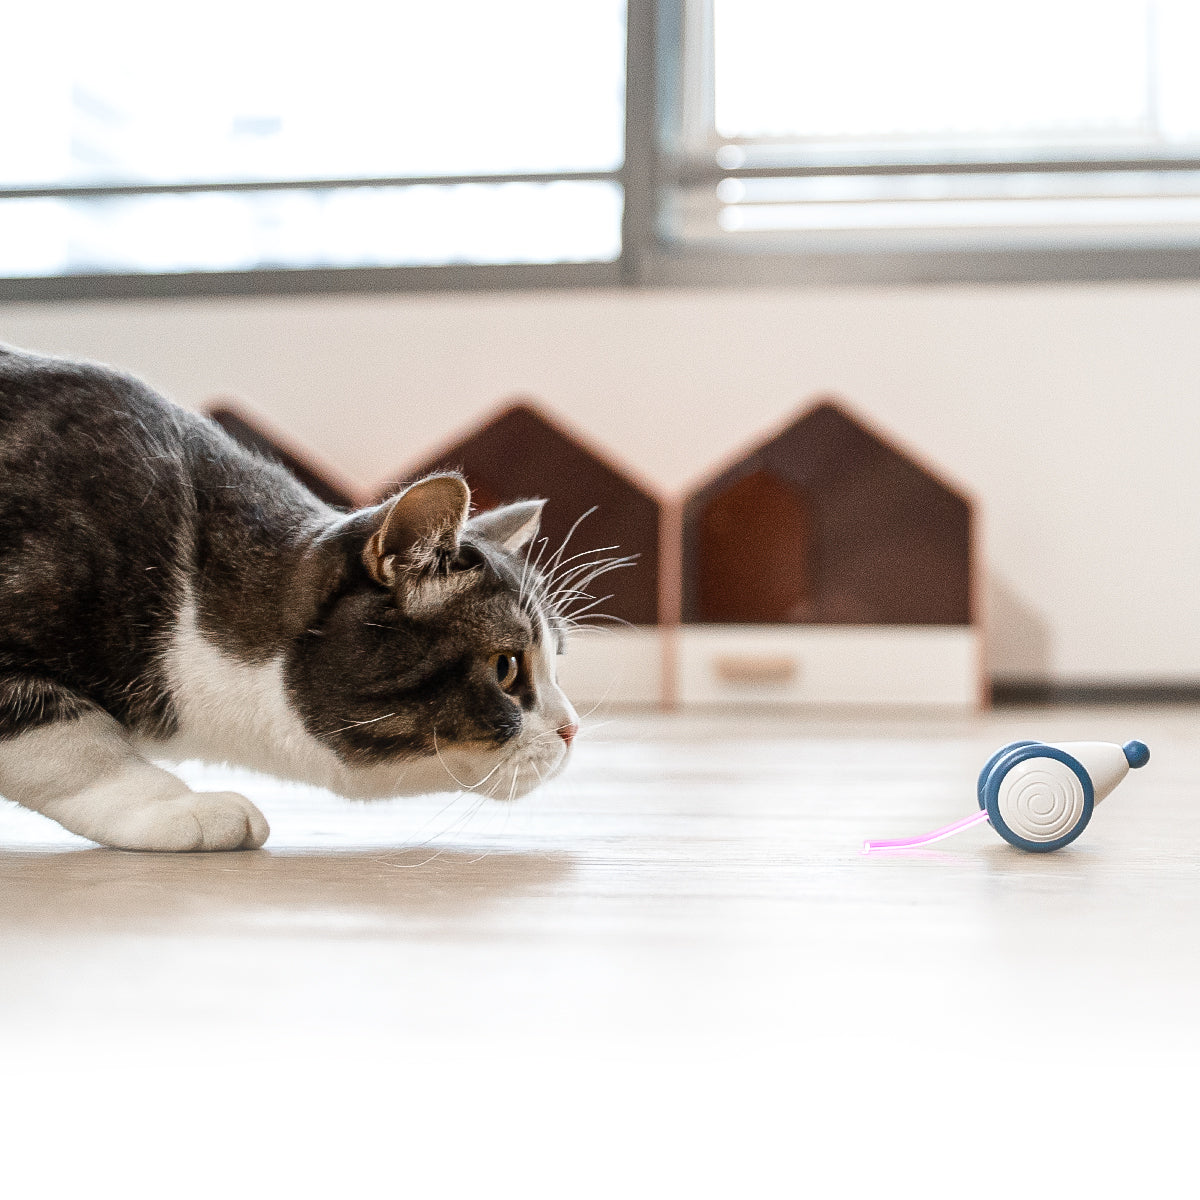 Wicked Mouse: New Smart Bionic Mouse Interactive Cat Toy